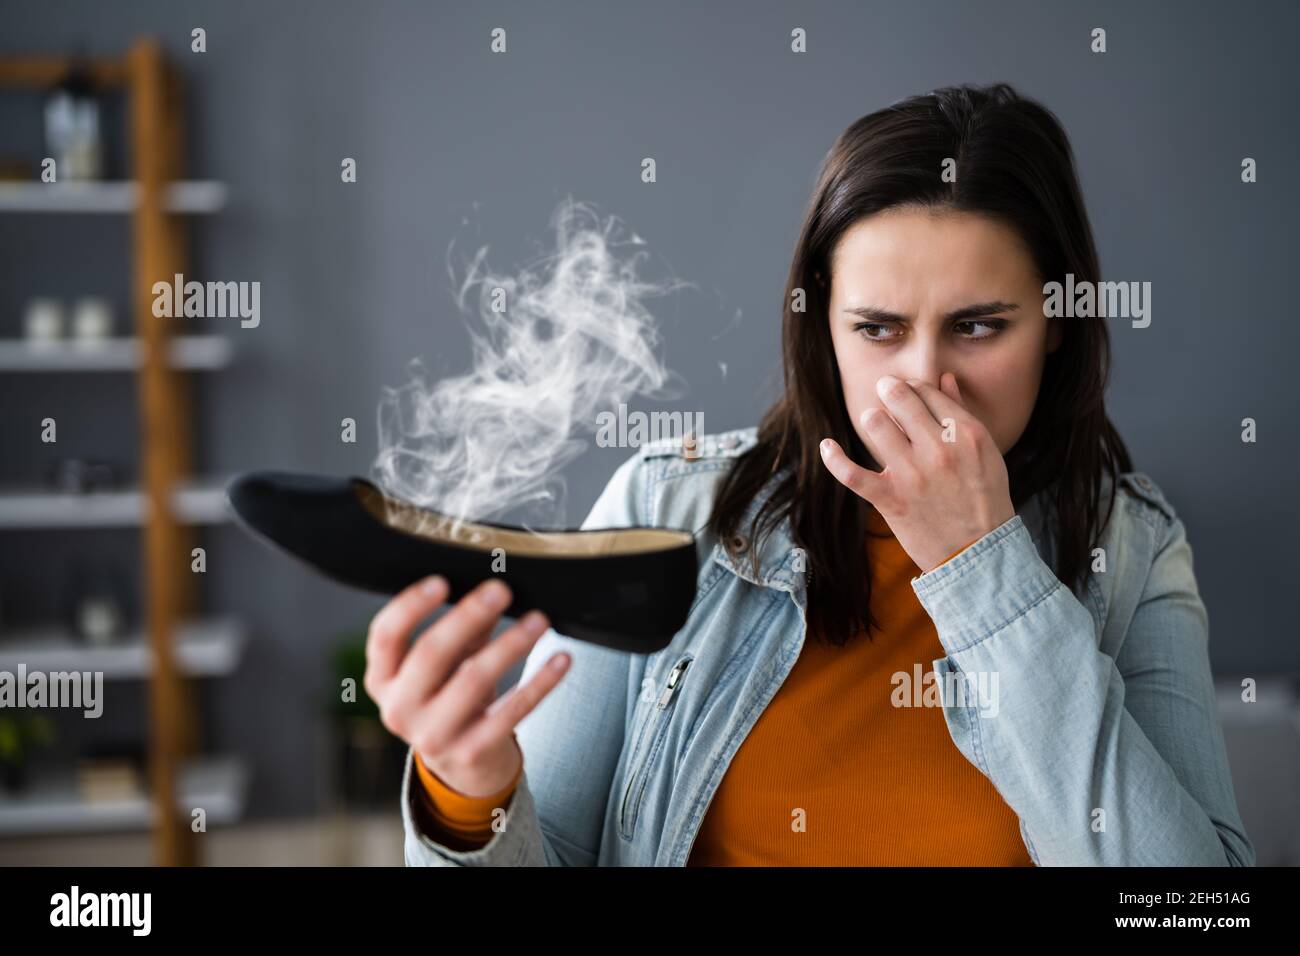 Woman Smelling Stinky Shoes. Feet Sweat And Odor Stock Photo